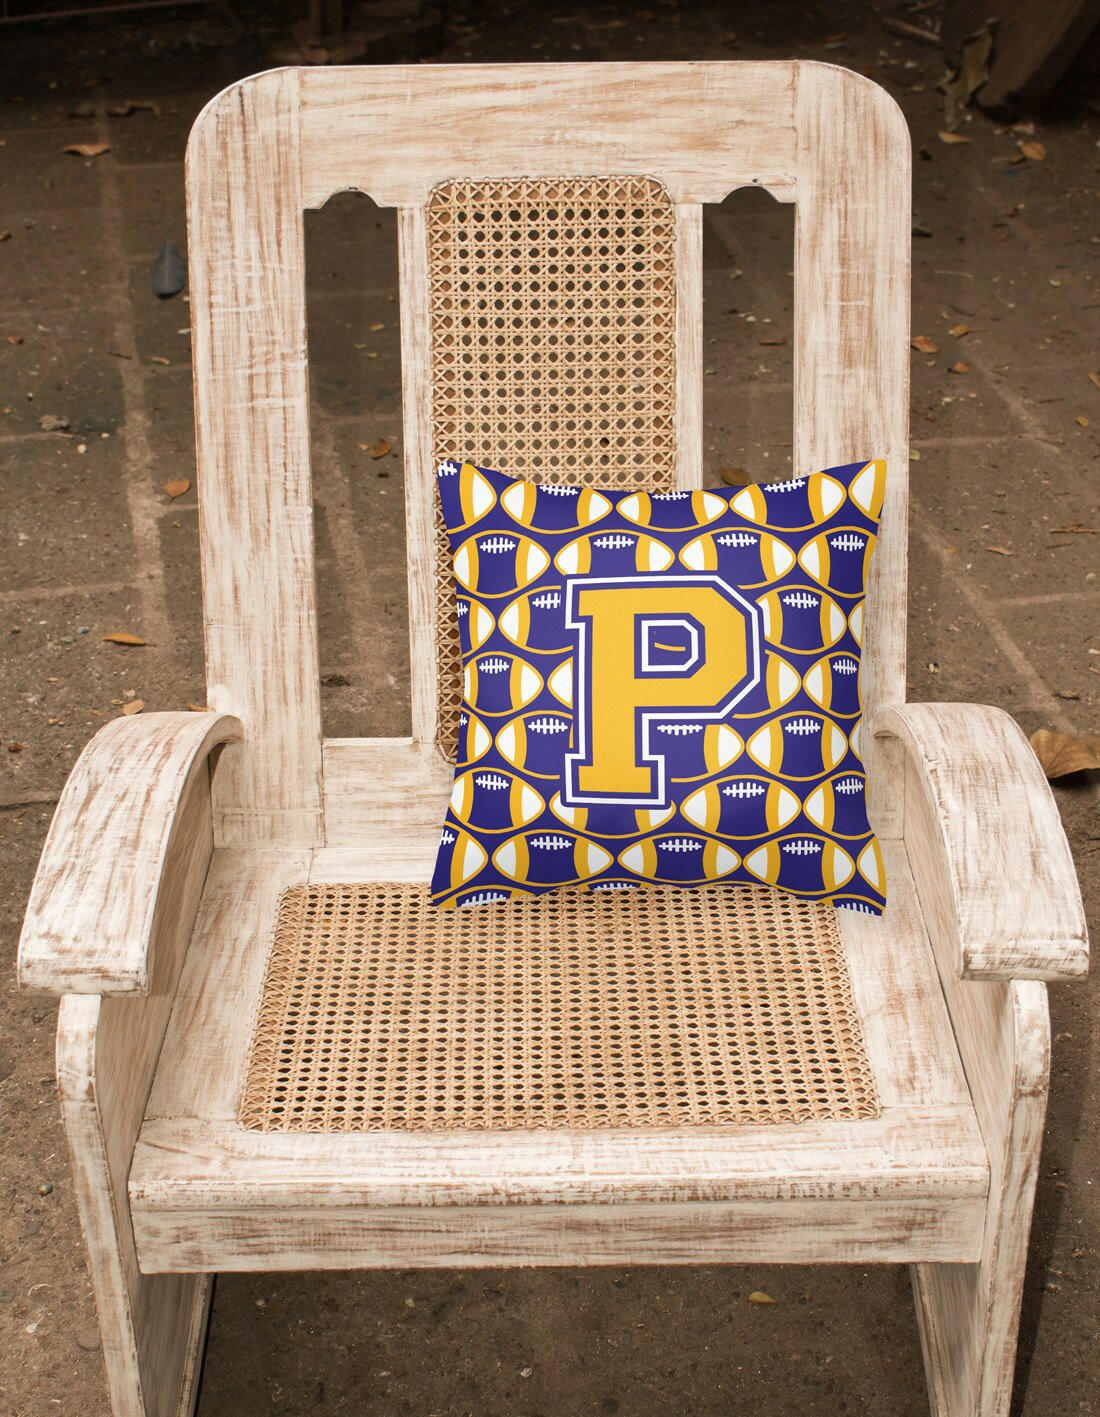 Letter P Football Purple and Gold Fabric Decorative Pillow CJ1064-PPW1414 by Caroline's Treasures